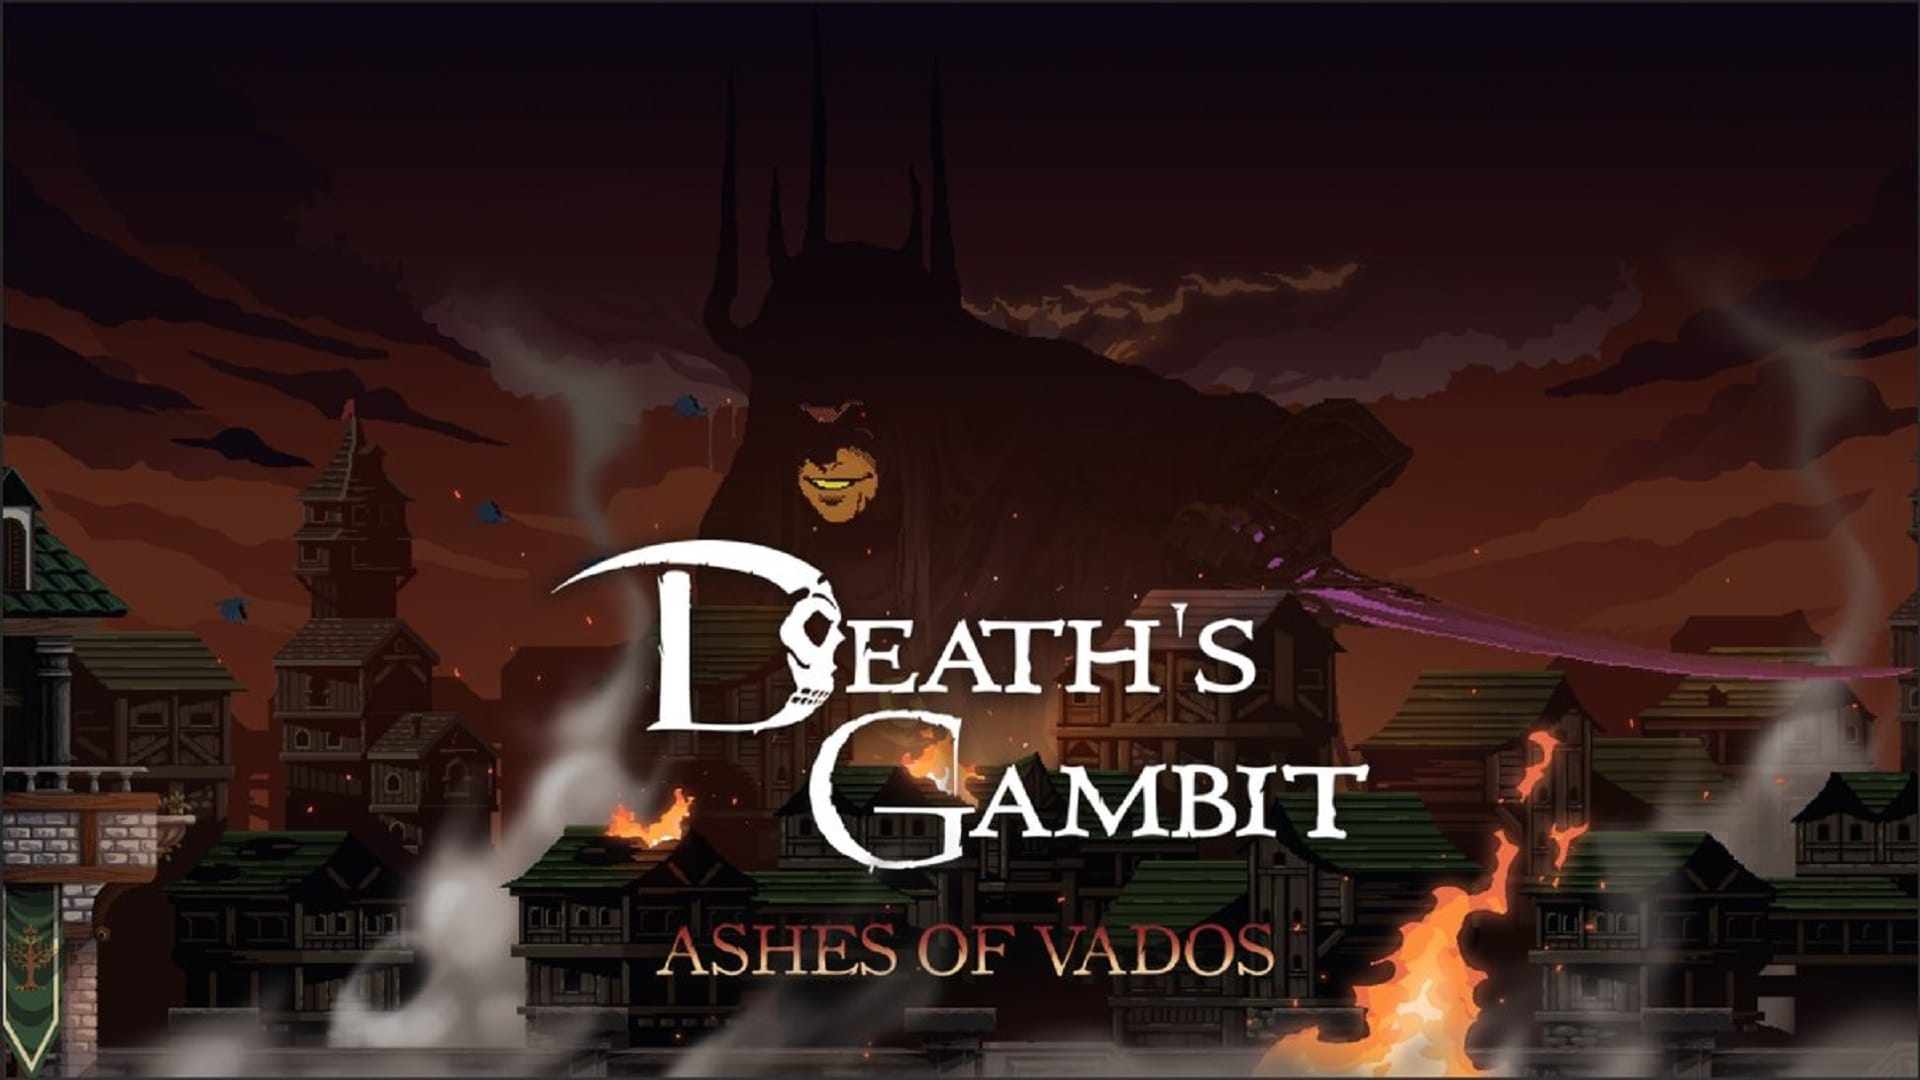 PC and PS4 title Death's Gambit tasks players will dispatching immortals